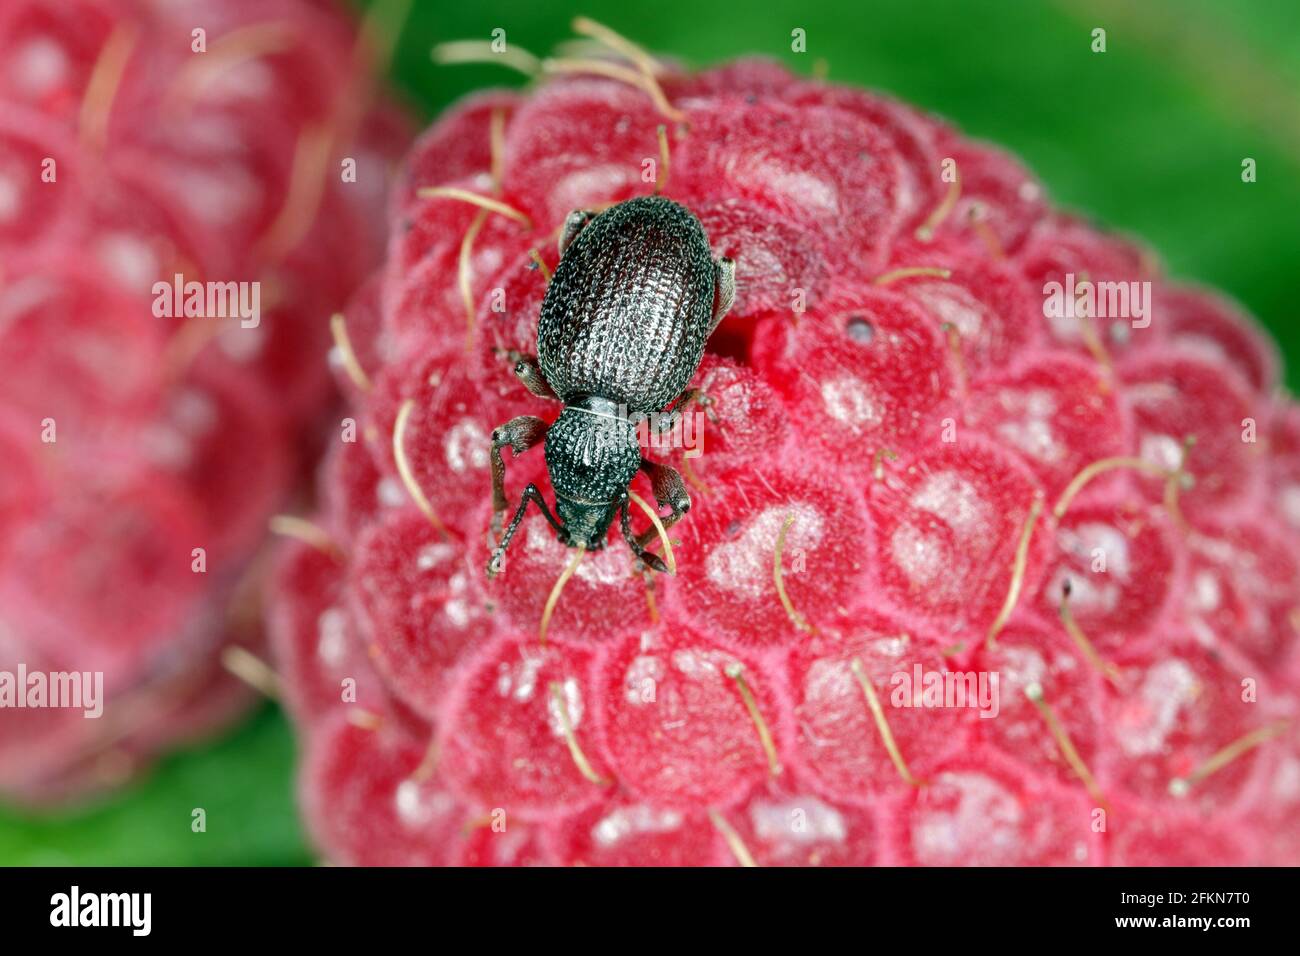 Strawberry root weevil - Otiorhynchus ovatus (latin name) in the raspberry fruit.  It is a species of weevils in the family Curculionidae. Stock Photo